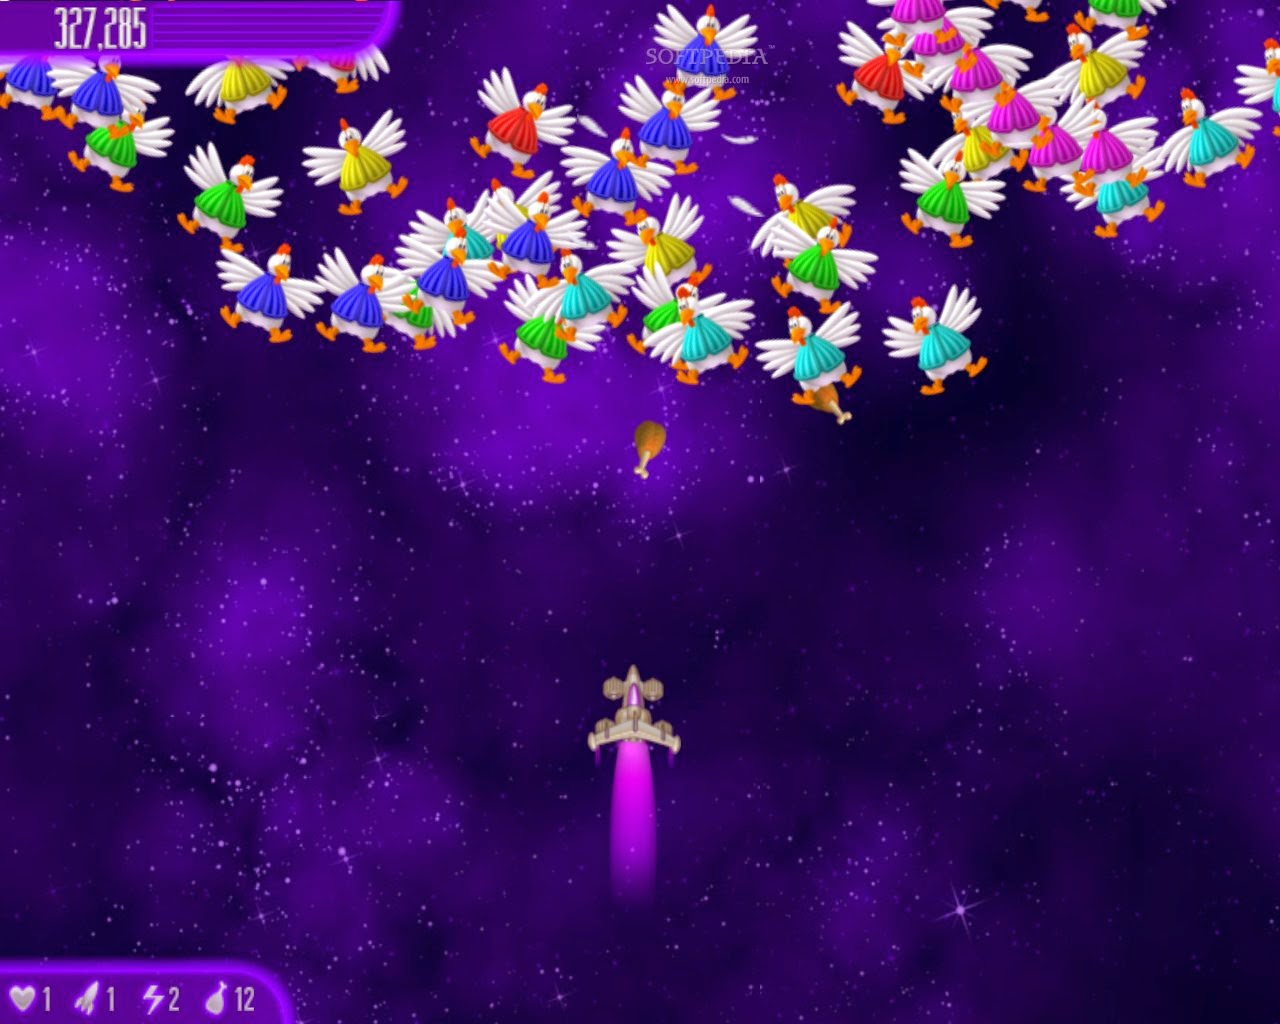 game chicken invaders 4 free download